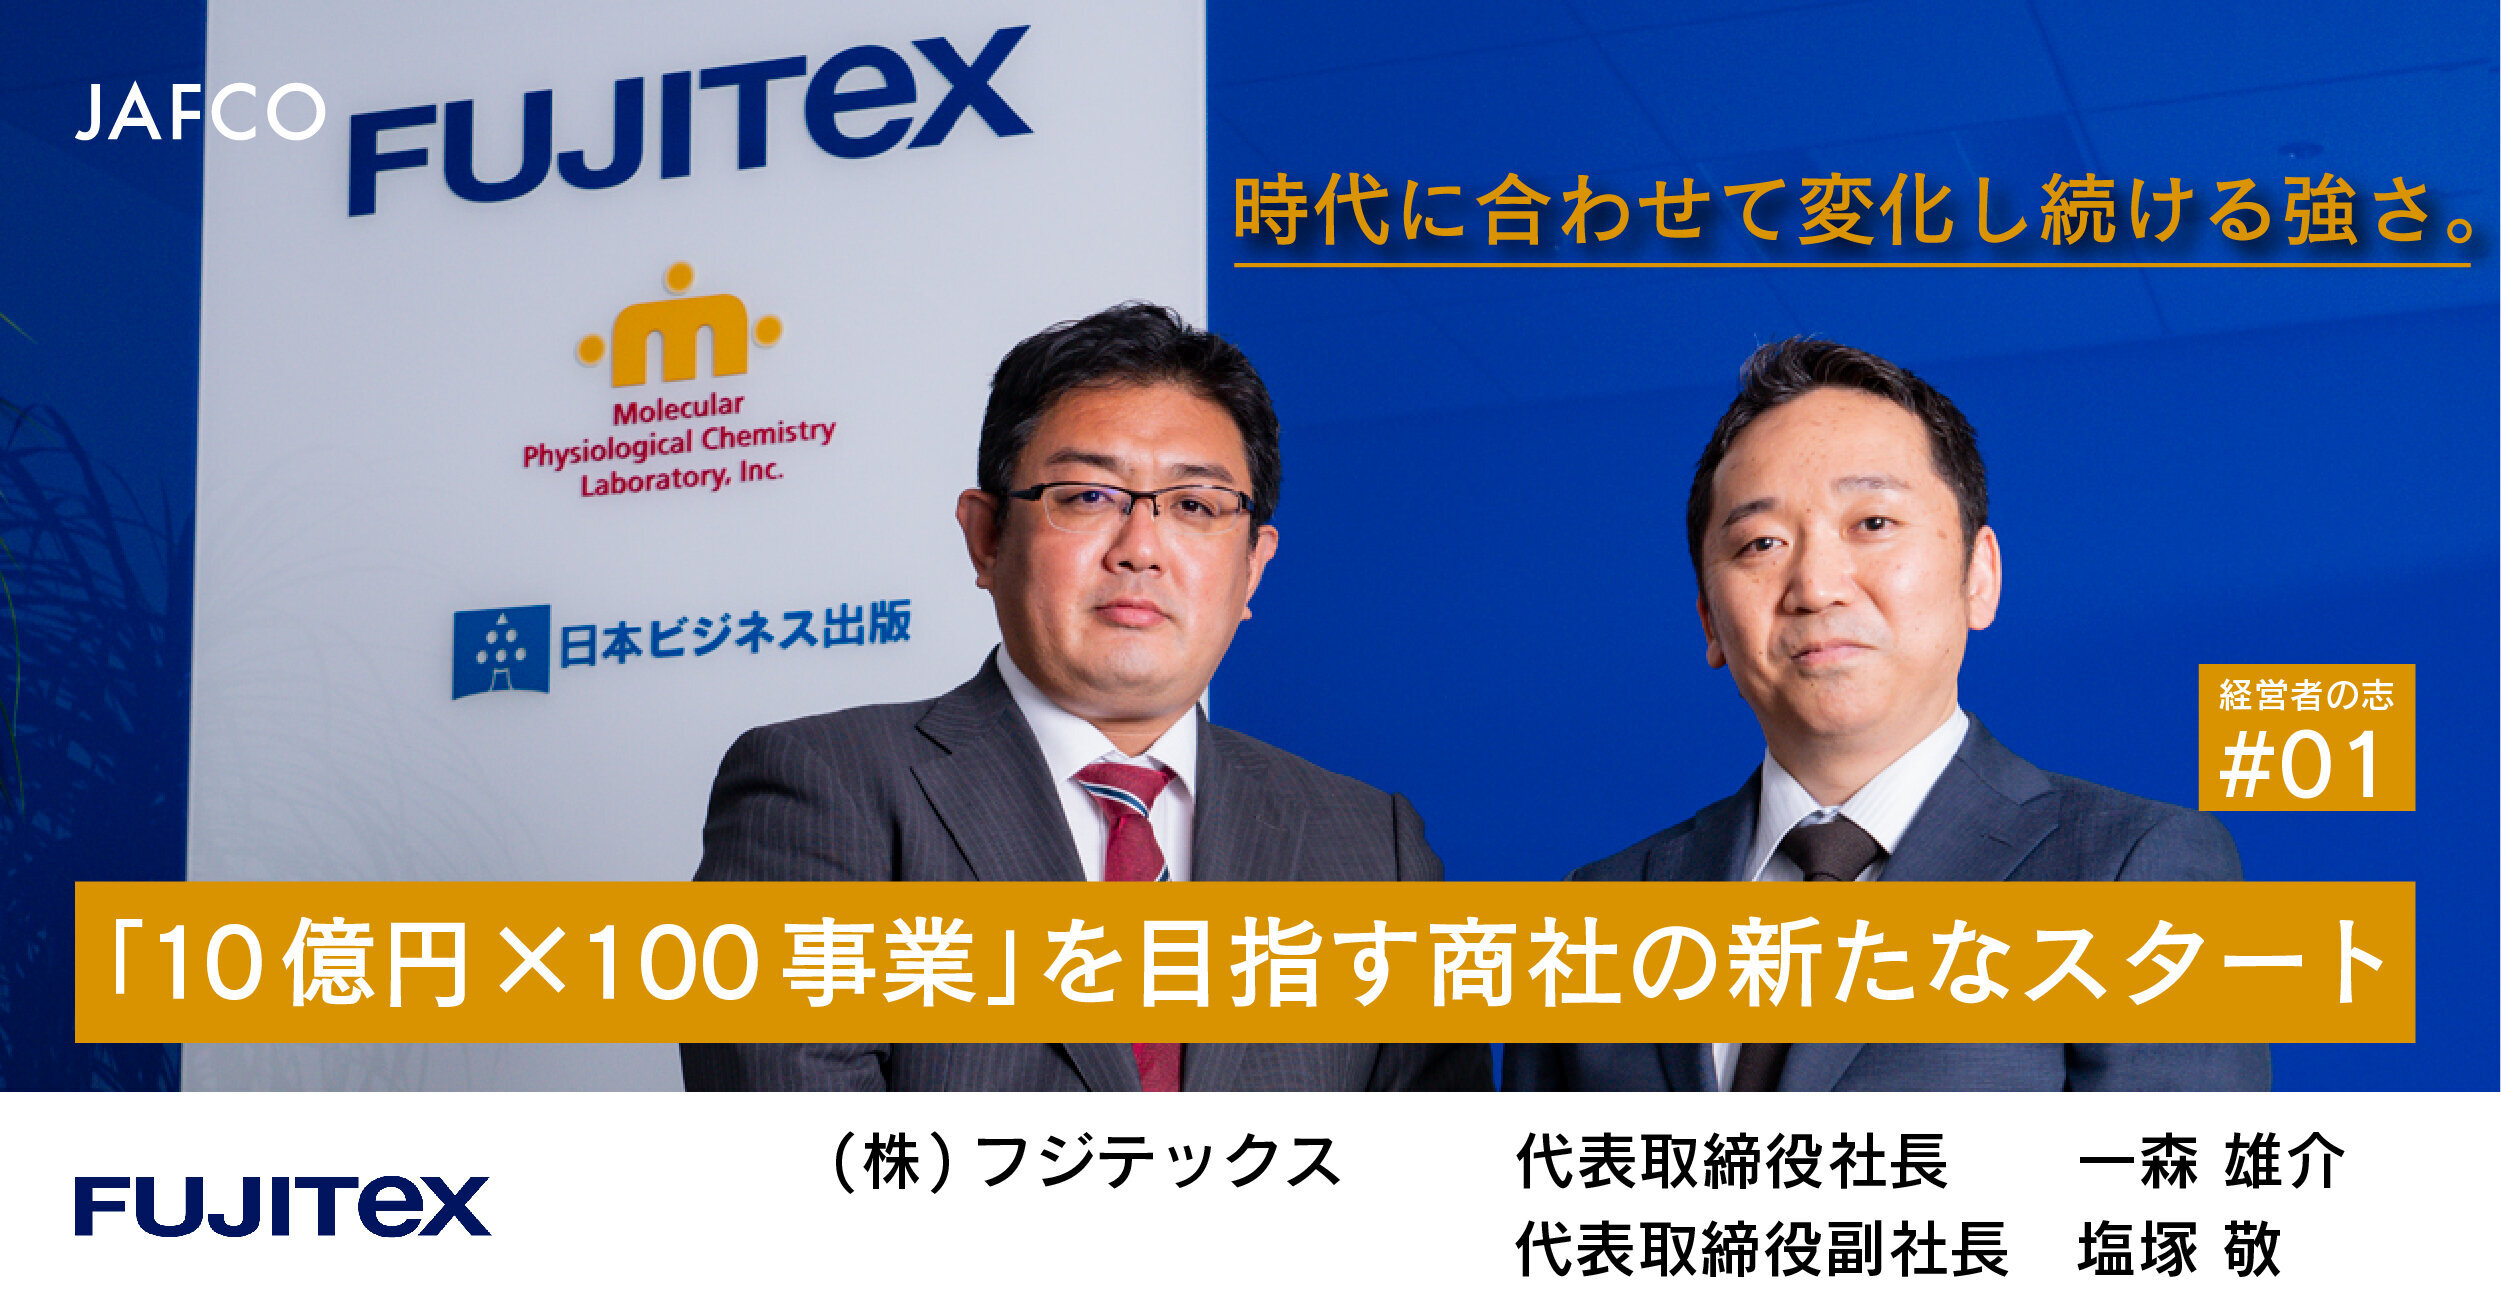 Strength to keep changing with the times. A New Start for a Trading Company Aiming for "1 Billion Yen x 100 Business"